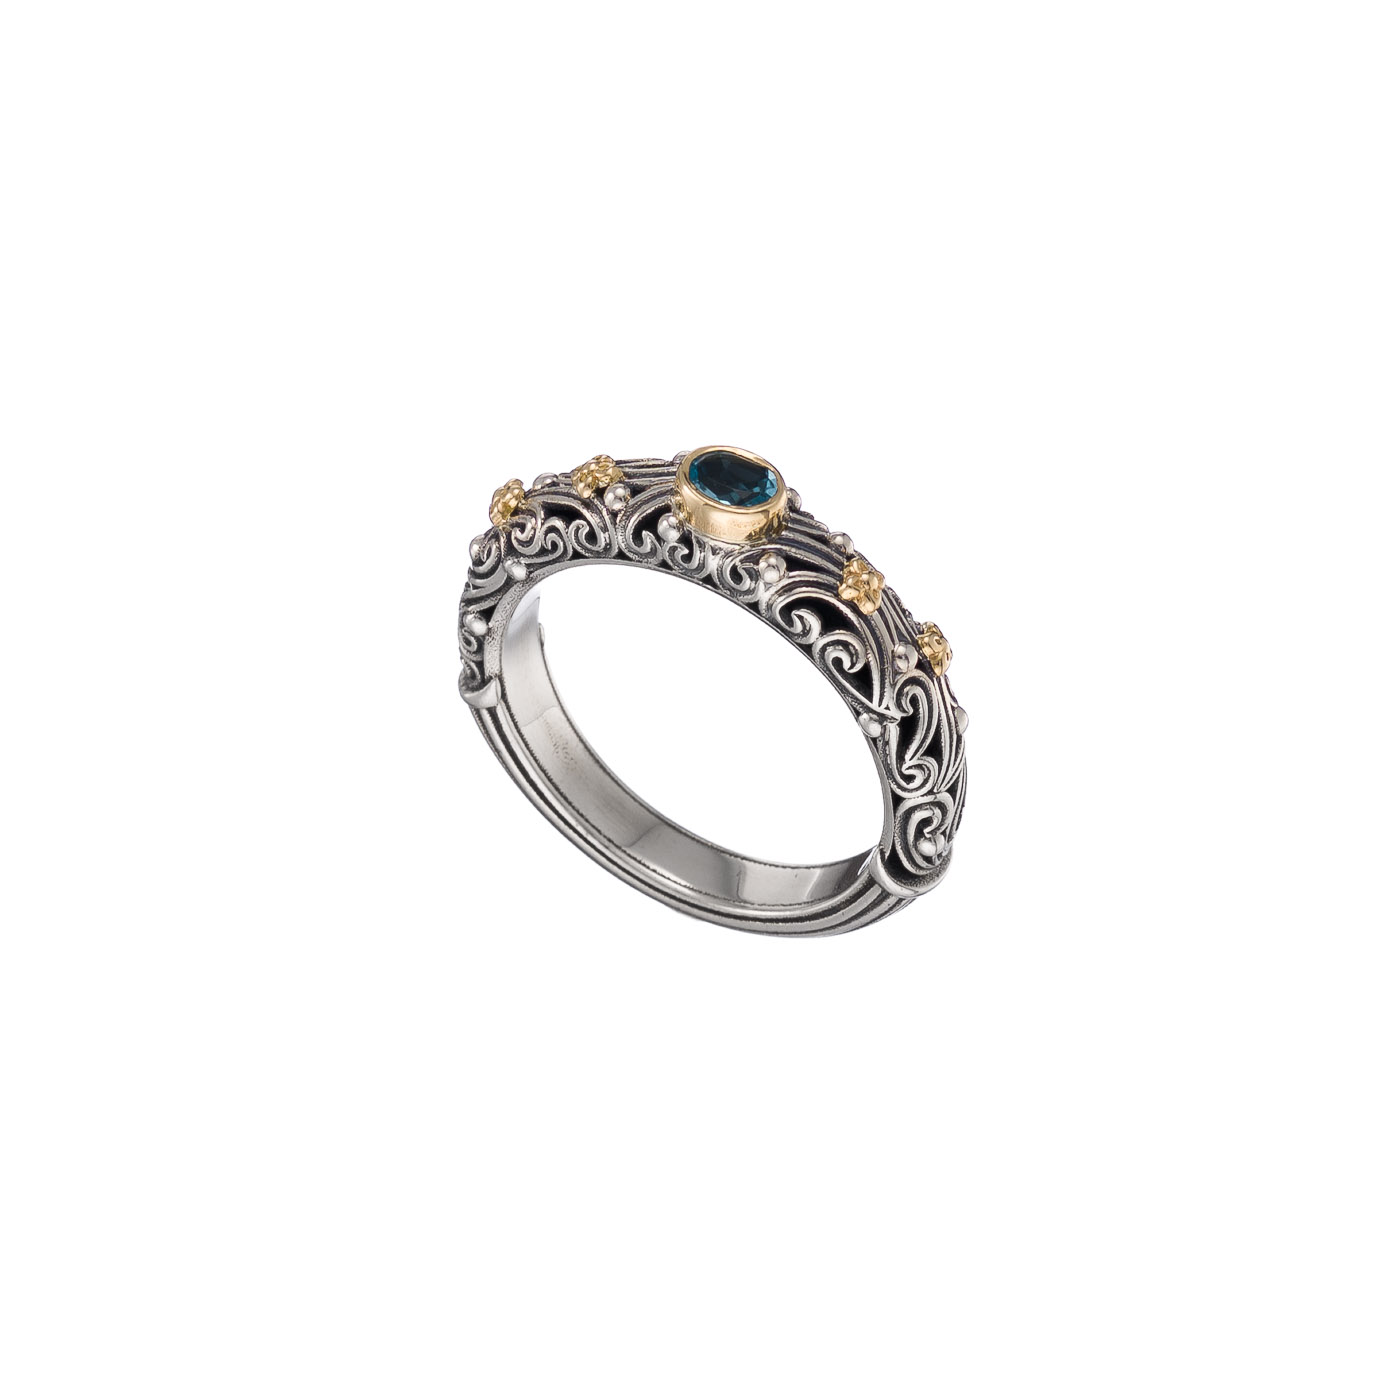 Kynthia Ring with oval Gemstone in 18K Gold and Sterling Silver